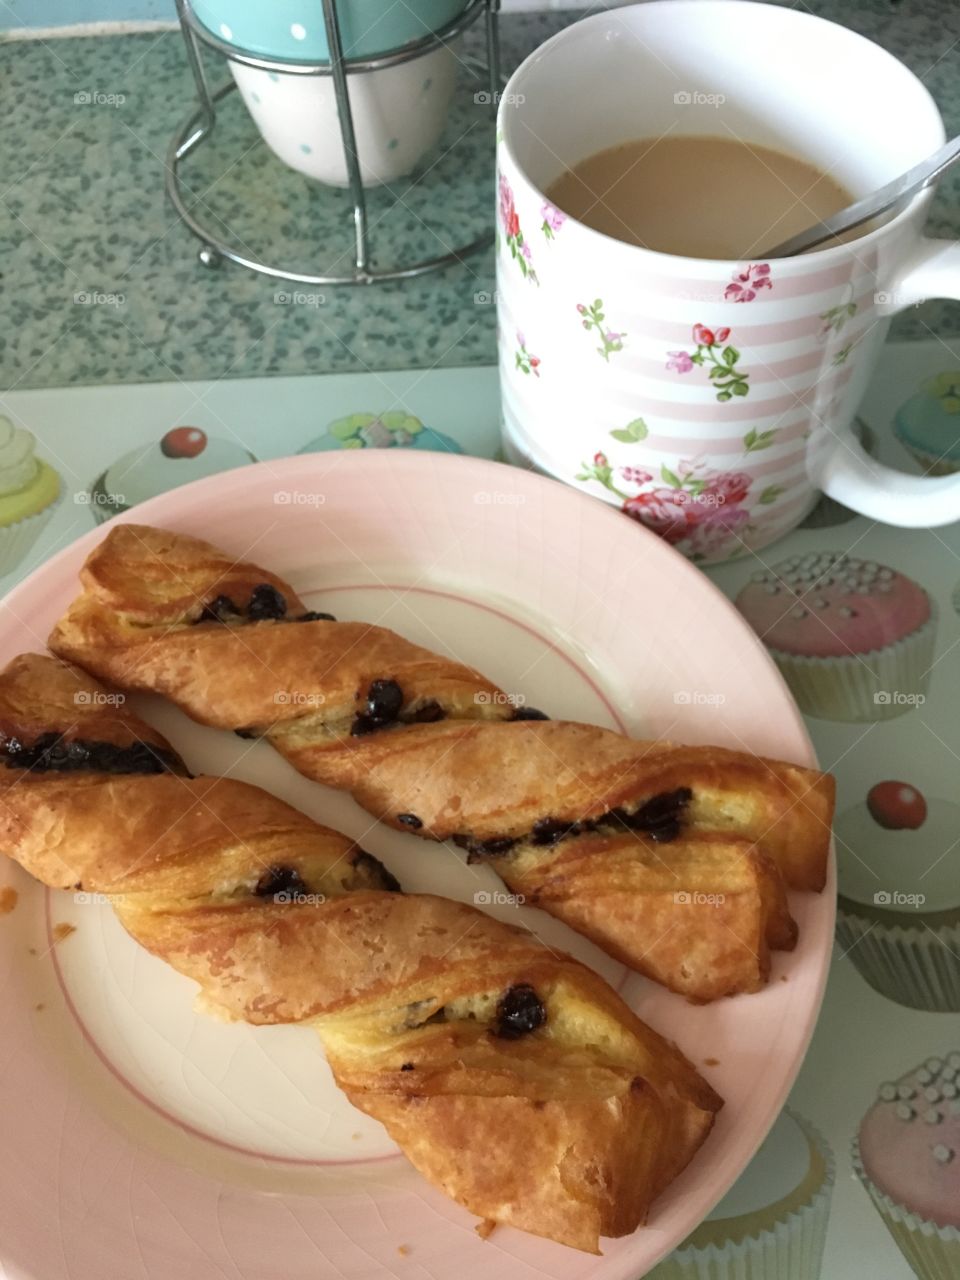 Lovely M&S gluten free continental pastry twists with Belgian chocolate inside with a cup of tea